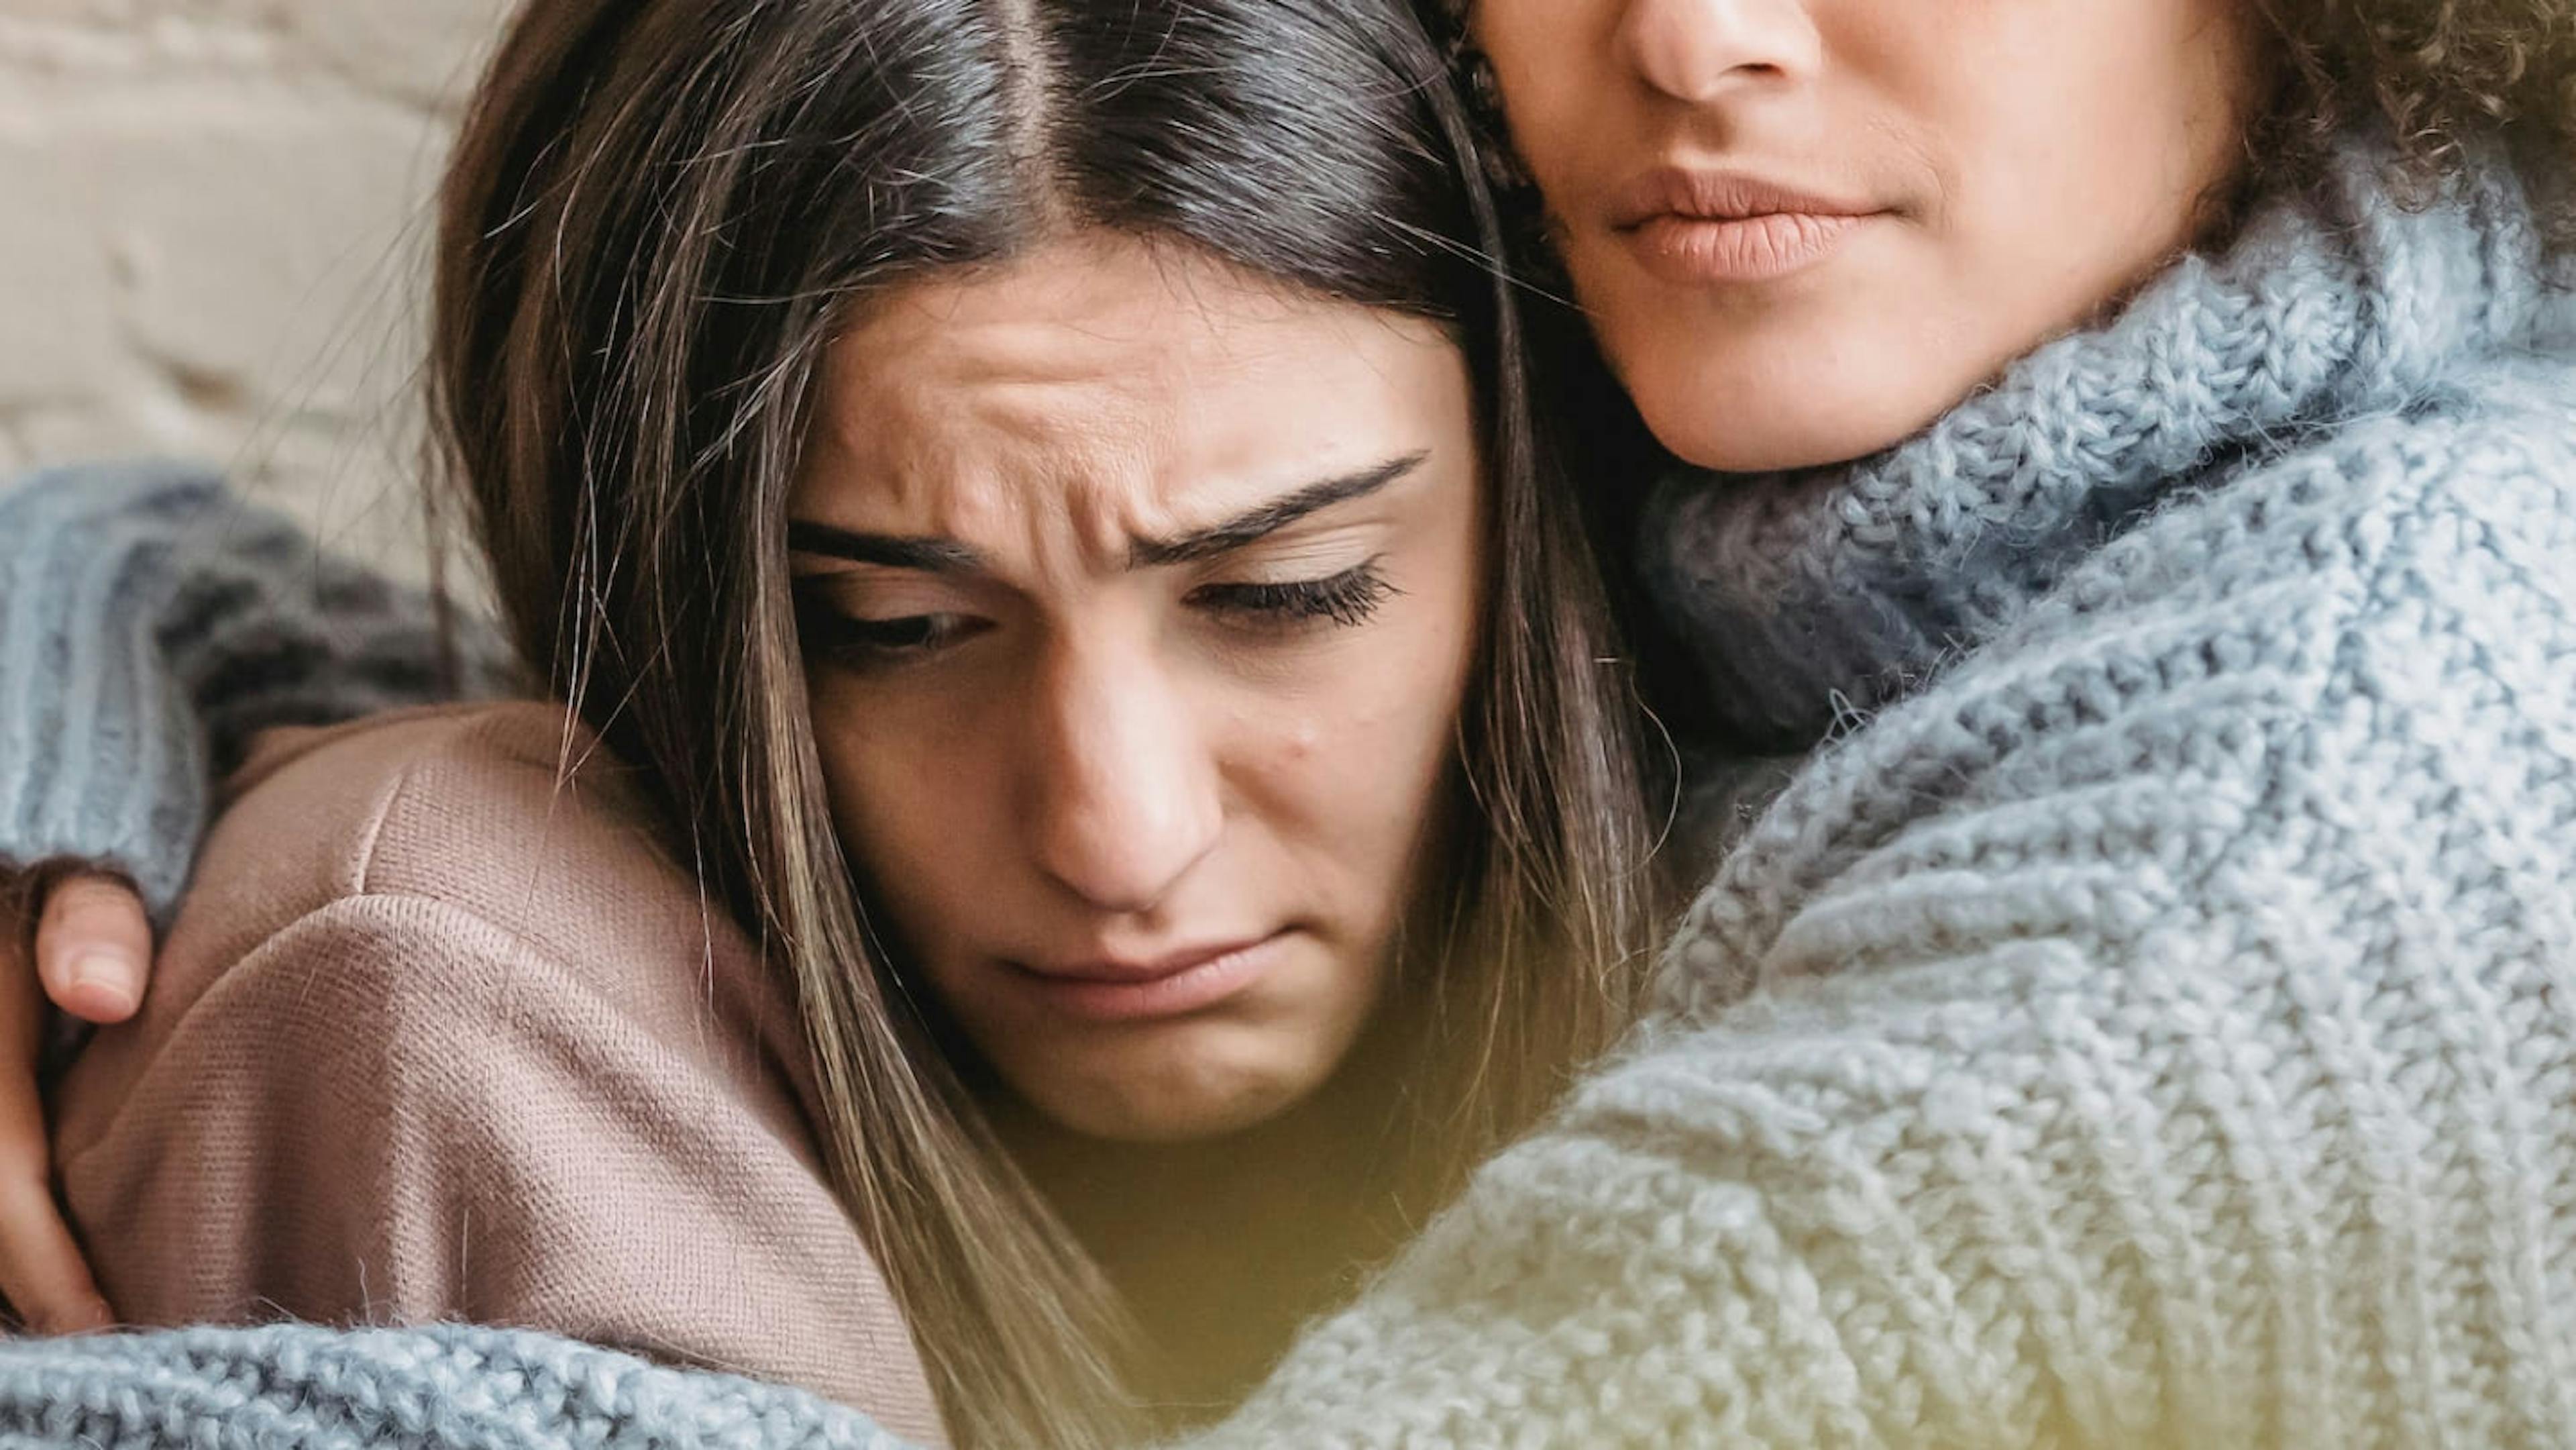 A woman on the brink of divorce is comforted by a friend.